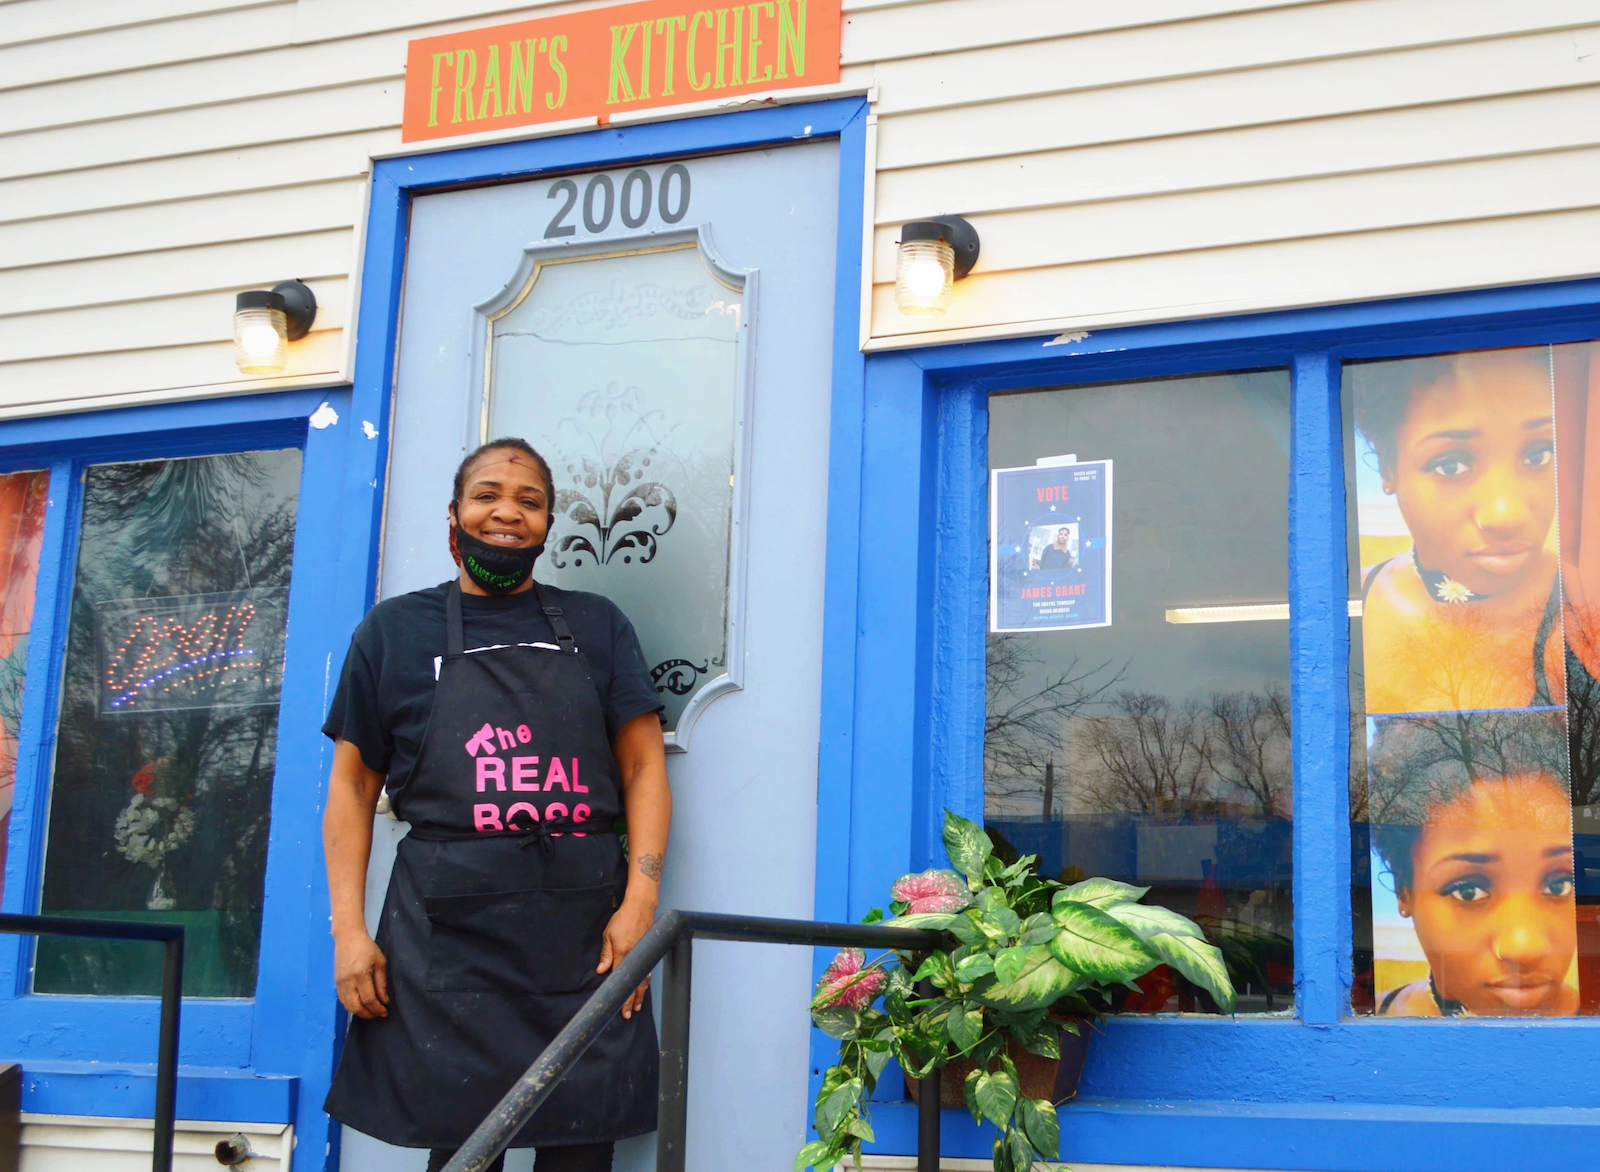 Frances Grant has a burgeoning soul food business, thanks in part to Brightpoint’s investment in her enterprise.